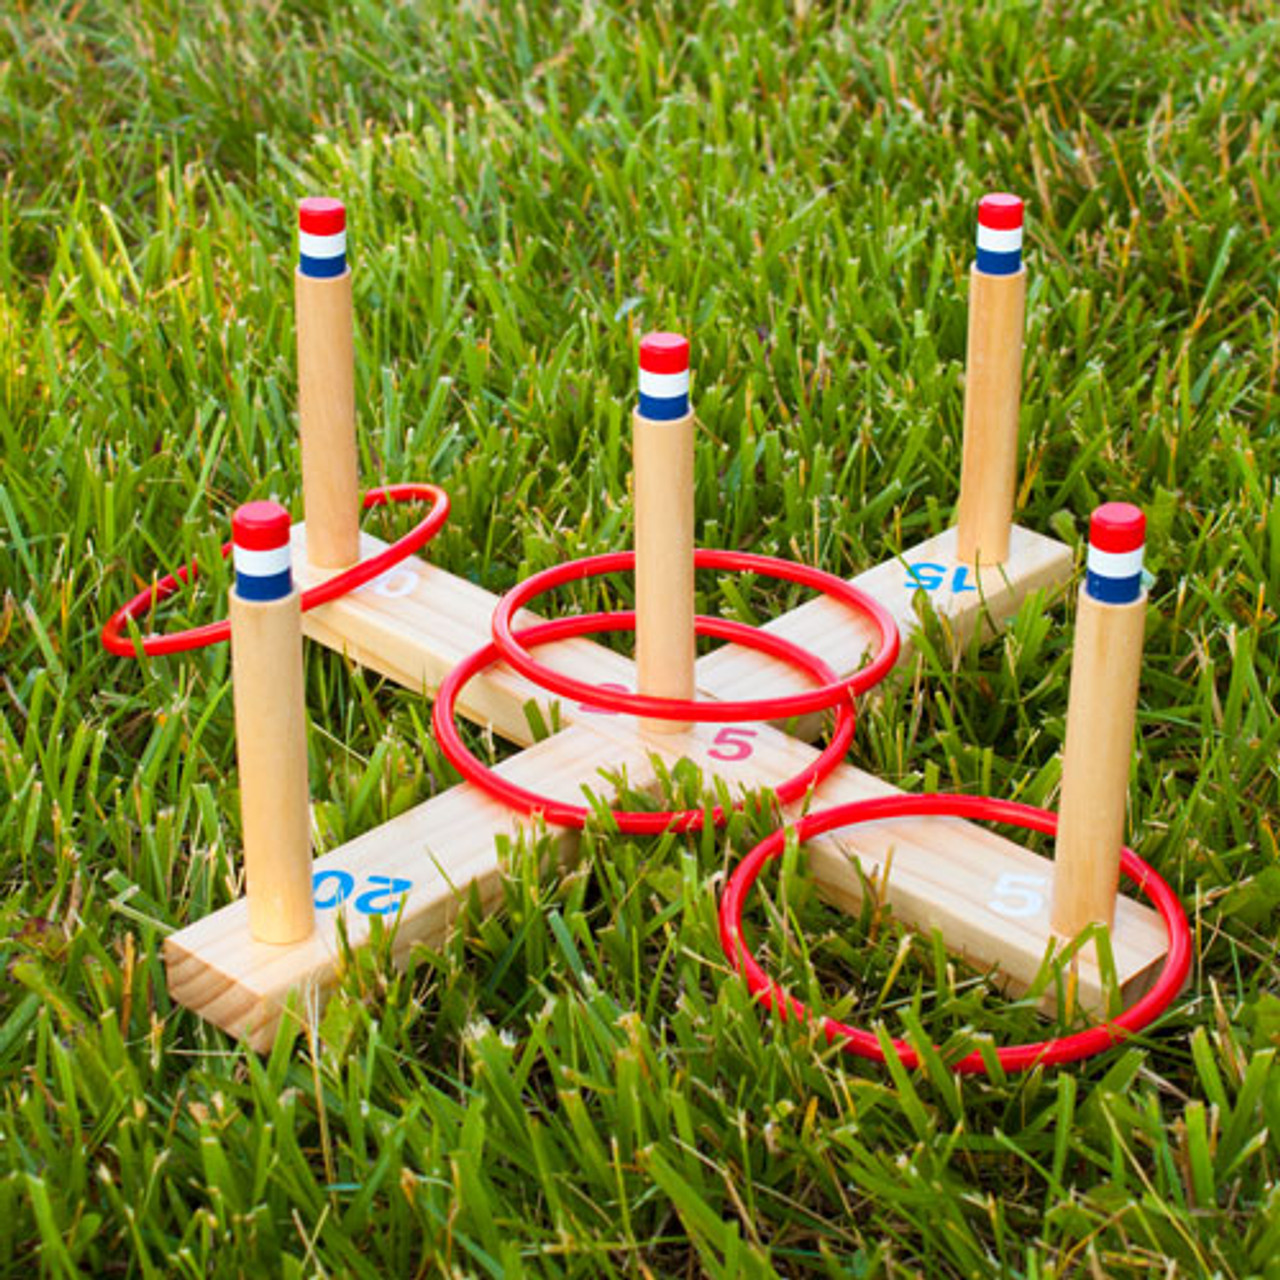 24590 RING TOSS GAME 5-PEG BASE WOOD PEGS 4 PLASTIC RINGS